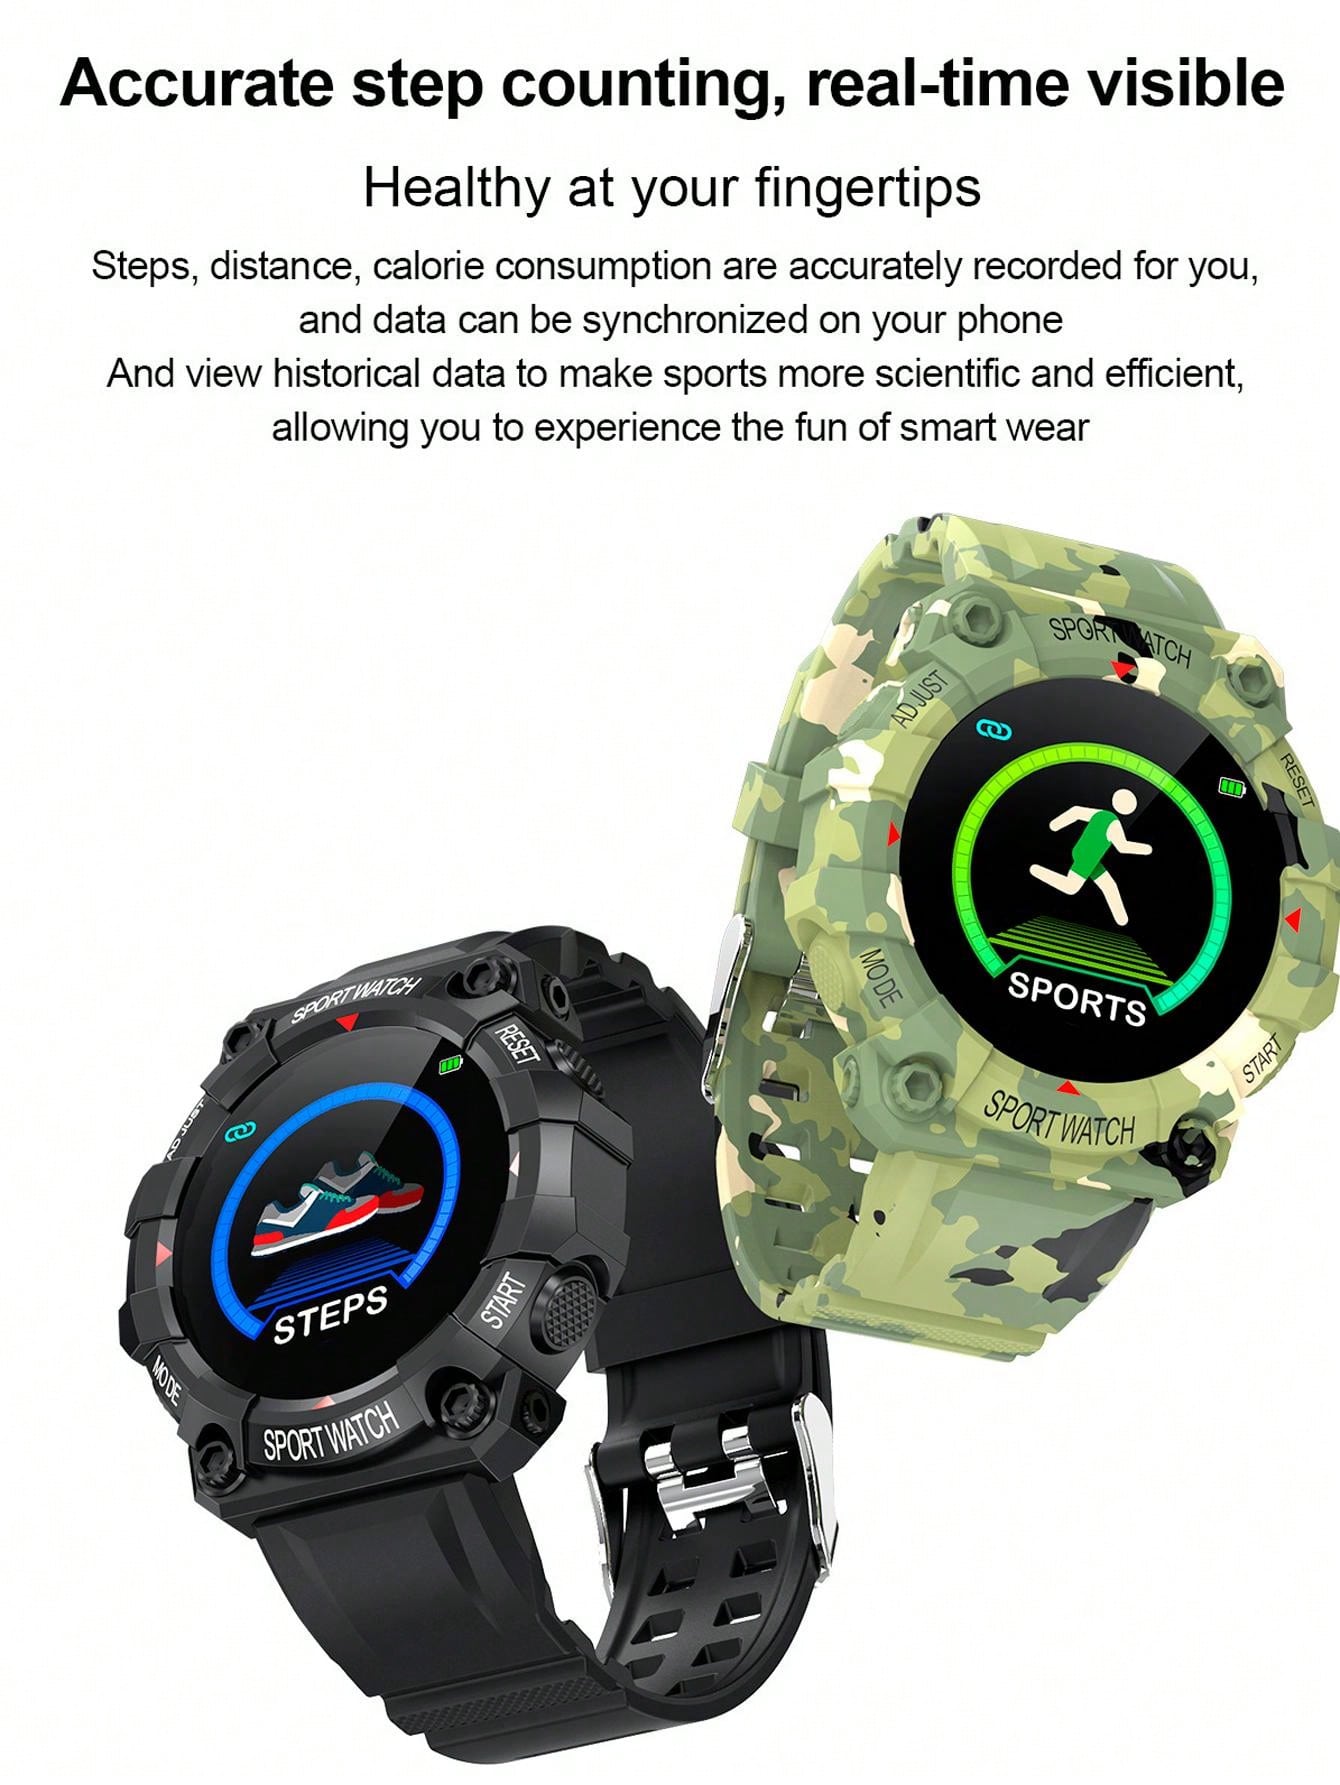 Compatible With Android & Ios Systems. Multifunctional Smartwatch With Touch Screen, Silicone Strap, Multiple Sports Modes, Camera Control, Social Media Notifications, Heart Rate & Sleep Monitor.